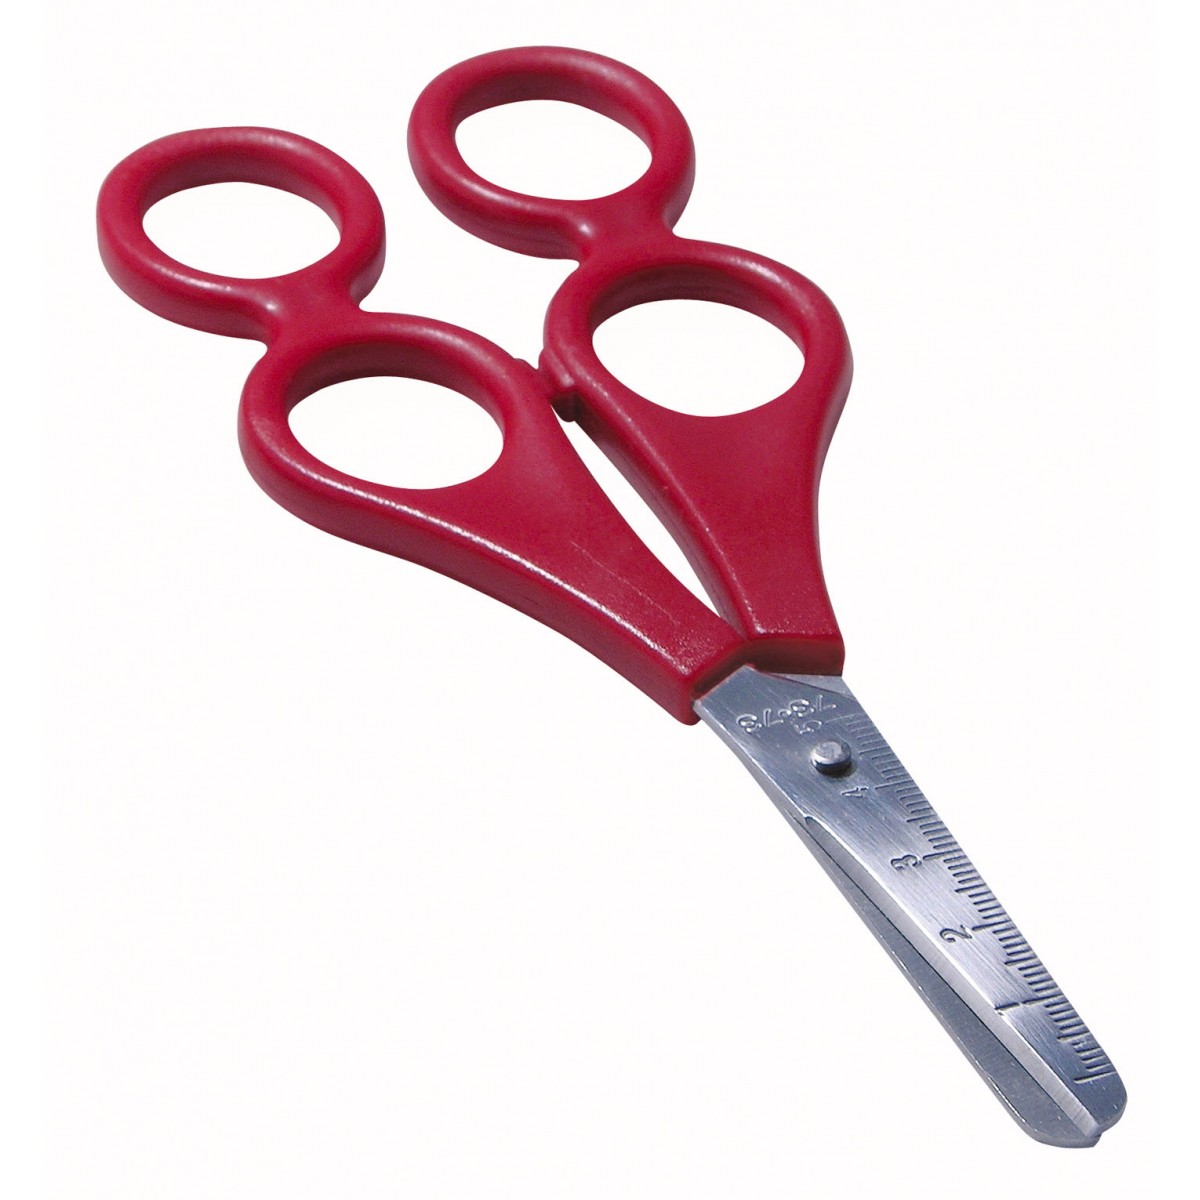 Therapy scissors with two handle eyes on each side.